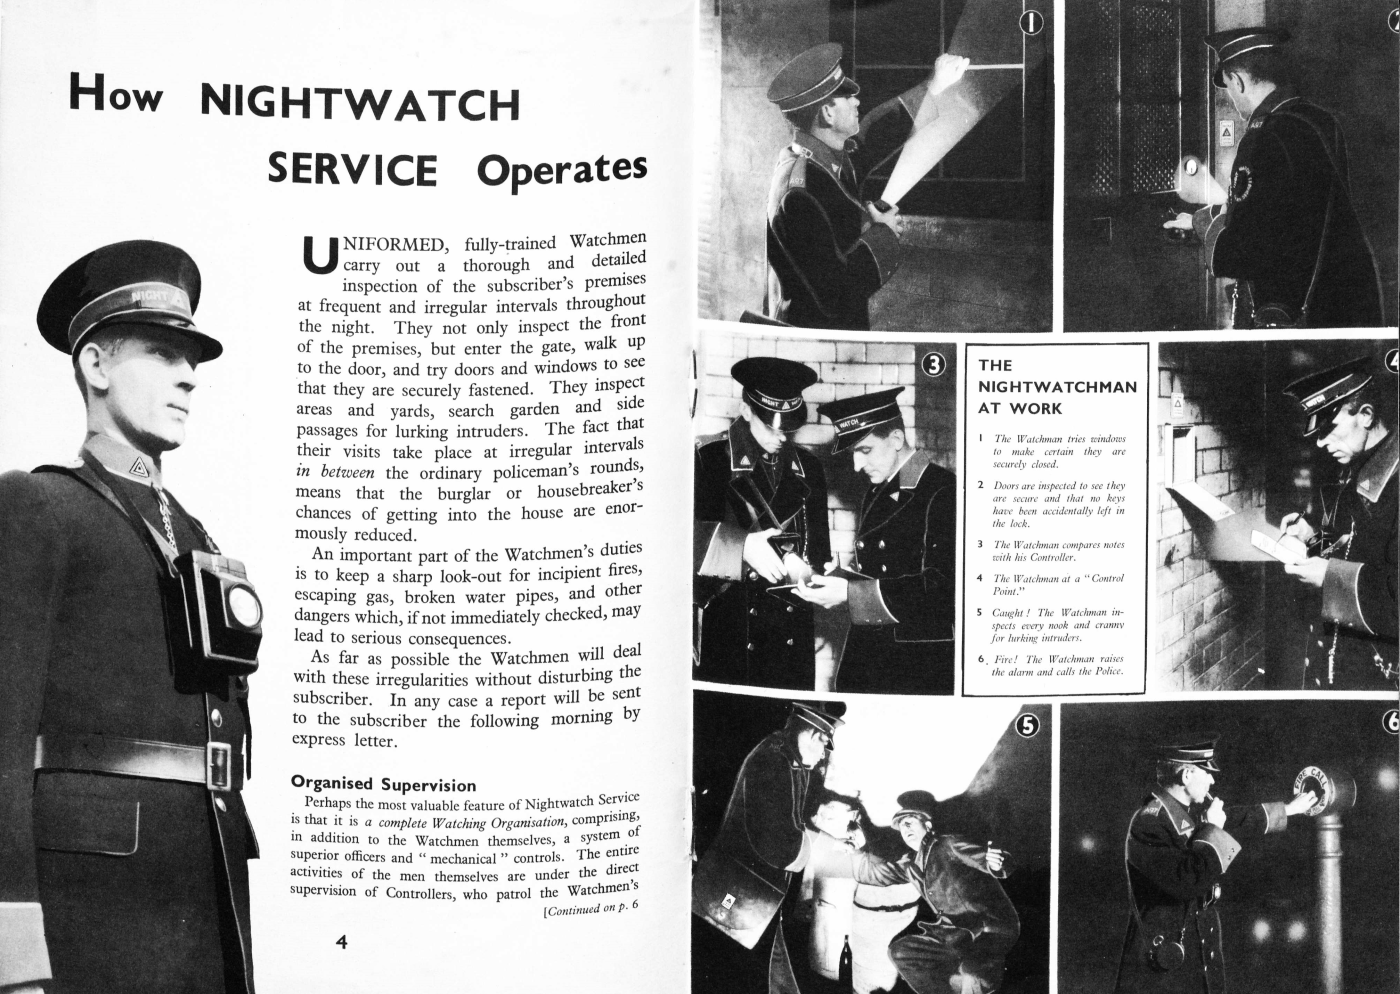 A magazine spread showing how a night watch service operates, with accompanying images